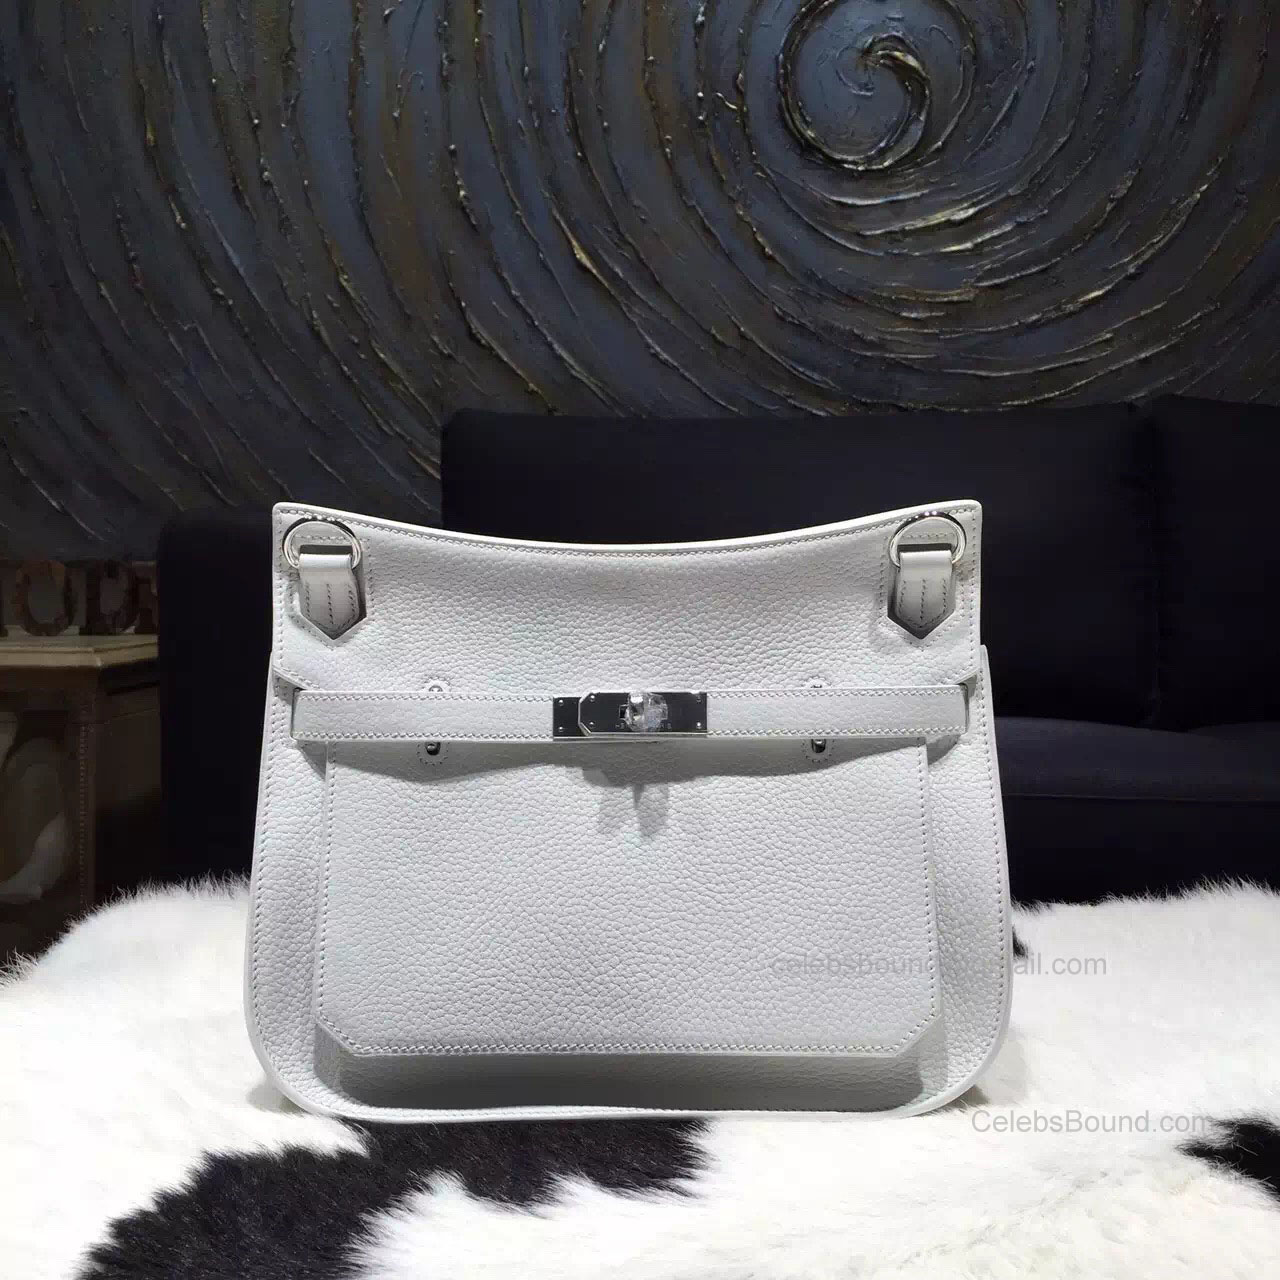 Hermes Jypsiere 34 Large Bag White Taurillon Clemence Handstitched